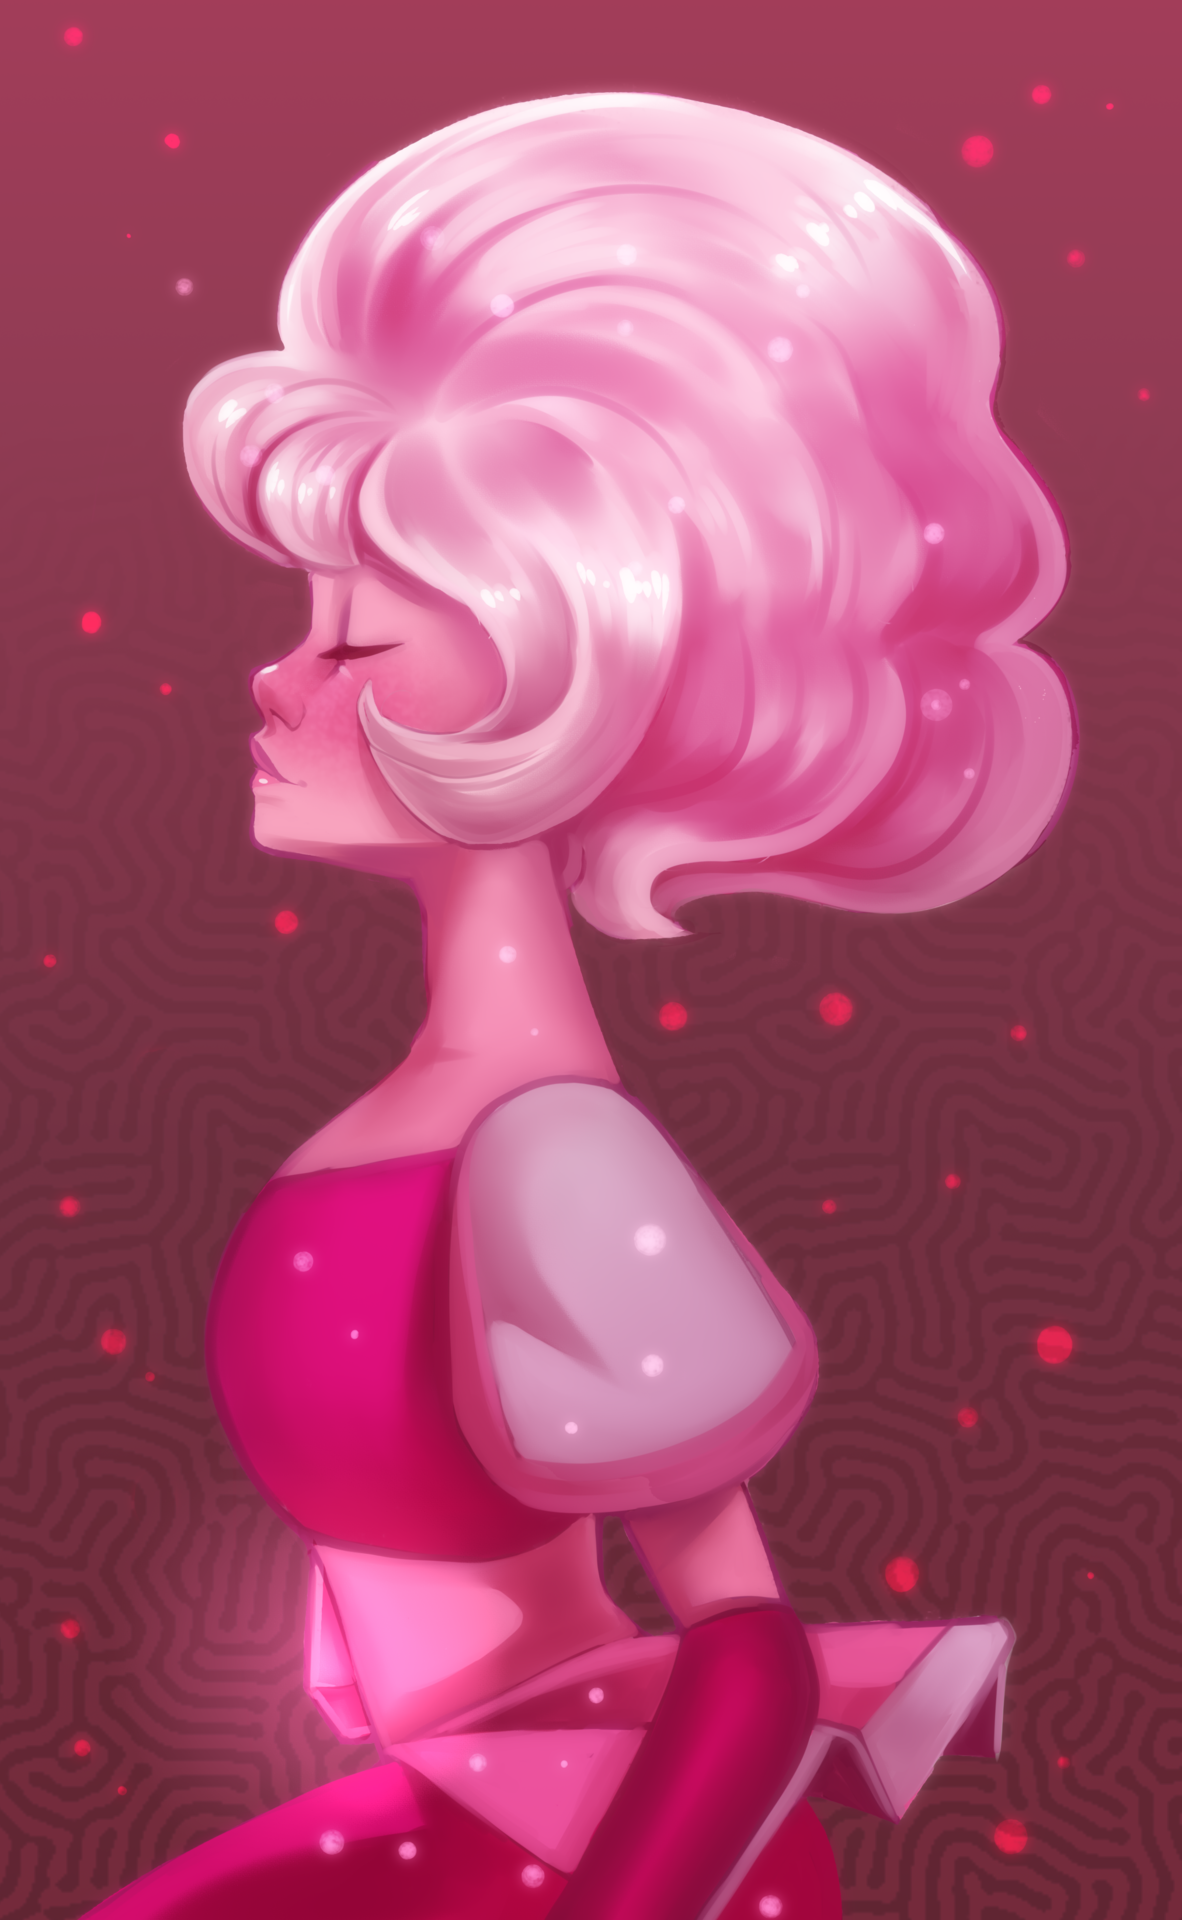 Didn’t know what to draw so i drew the pink lady